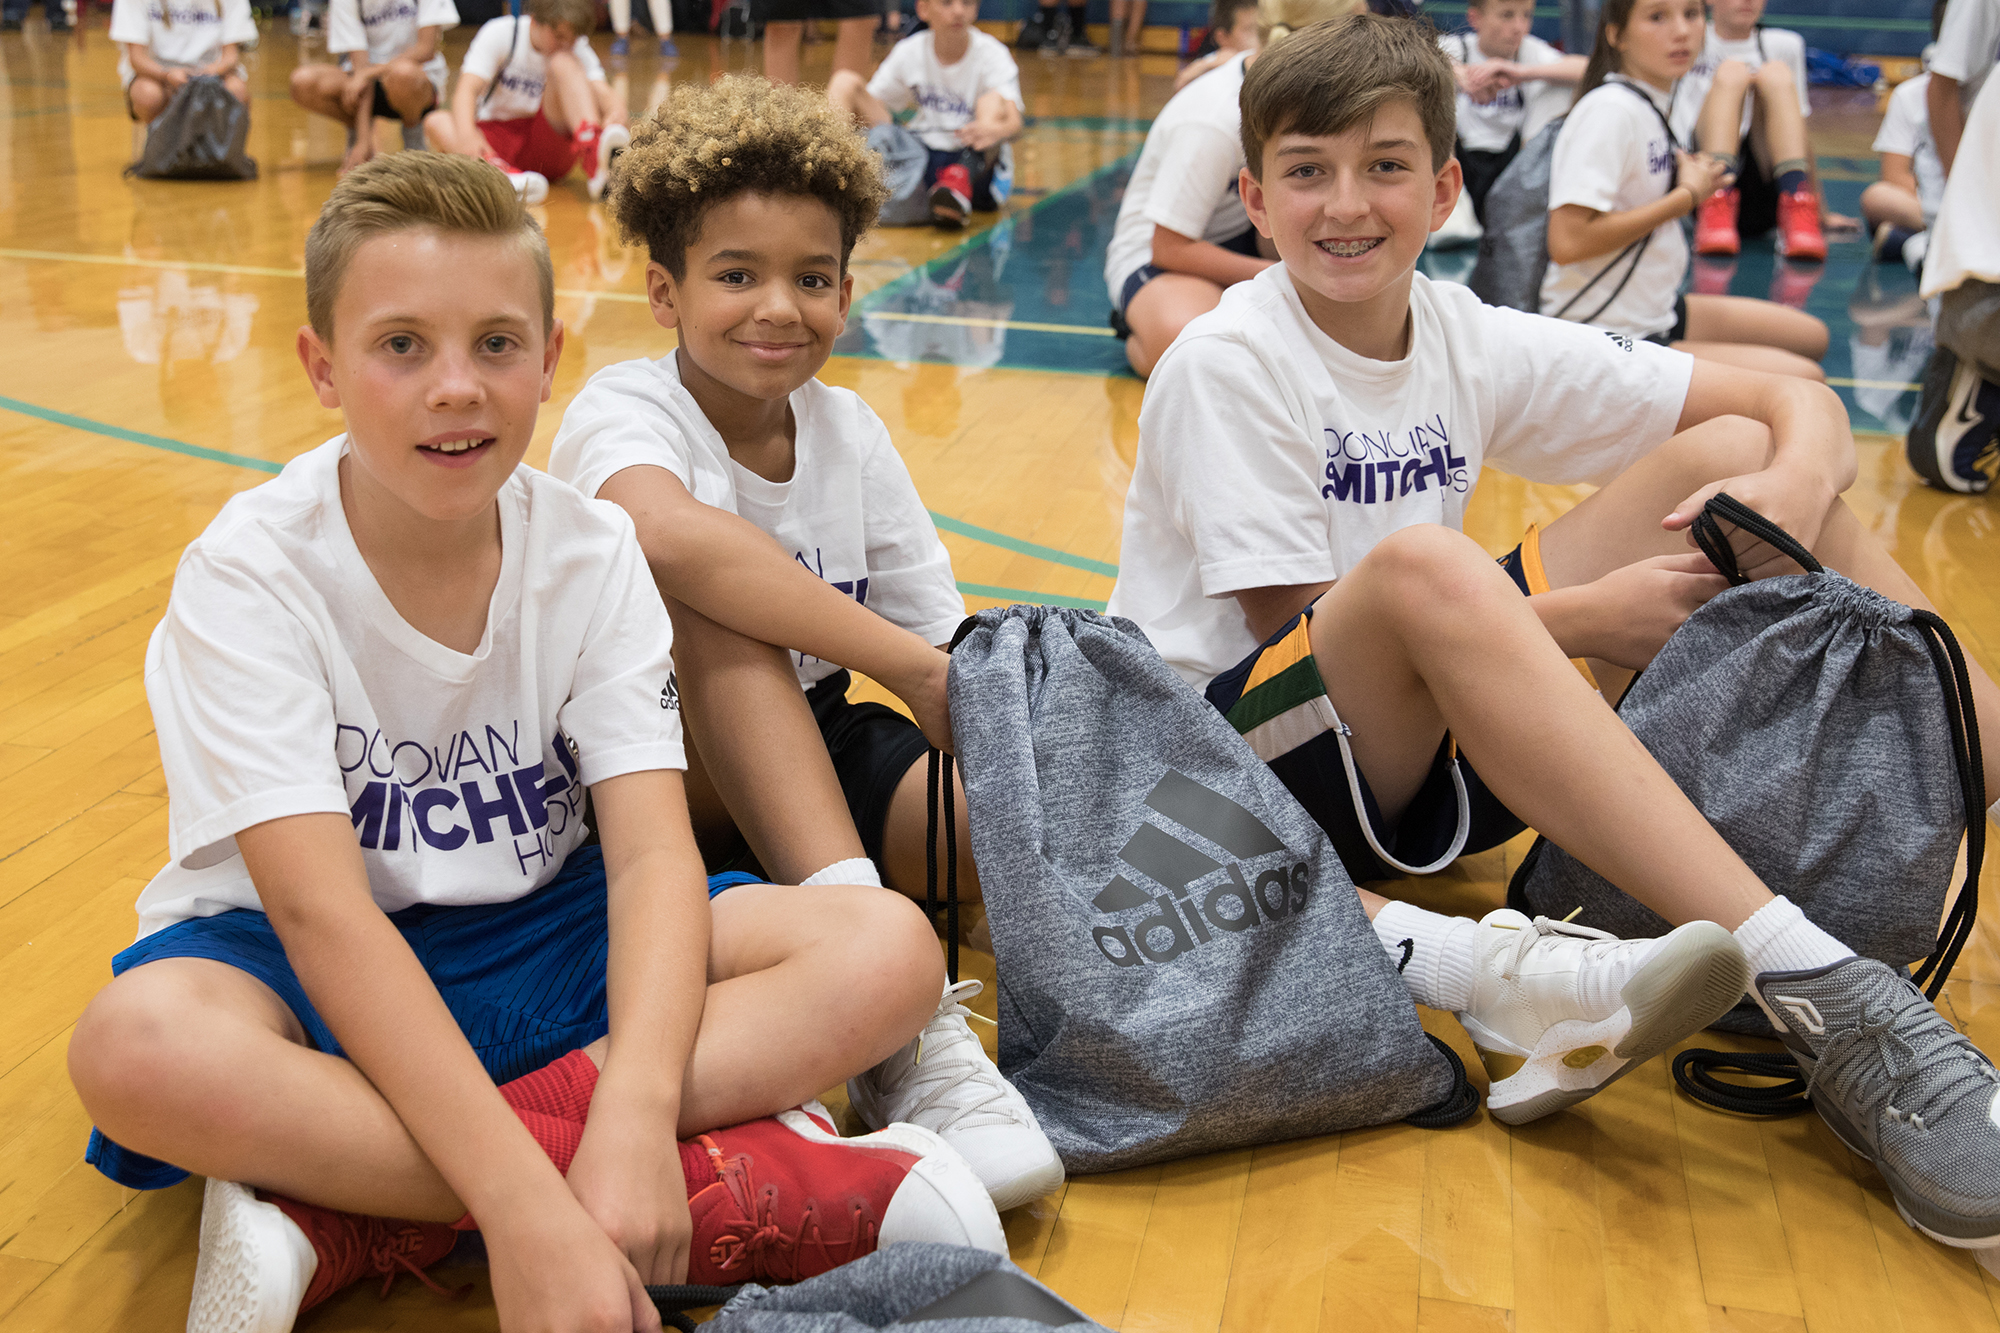 180730-donovan-mitchell-basketball-camp-session-2-WH-5717.jpg